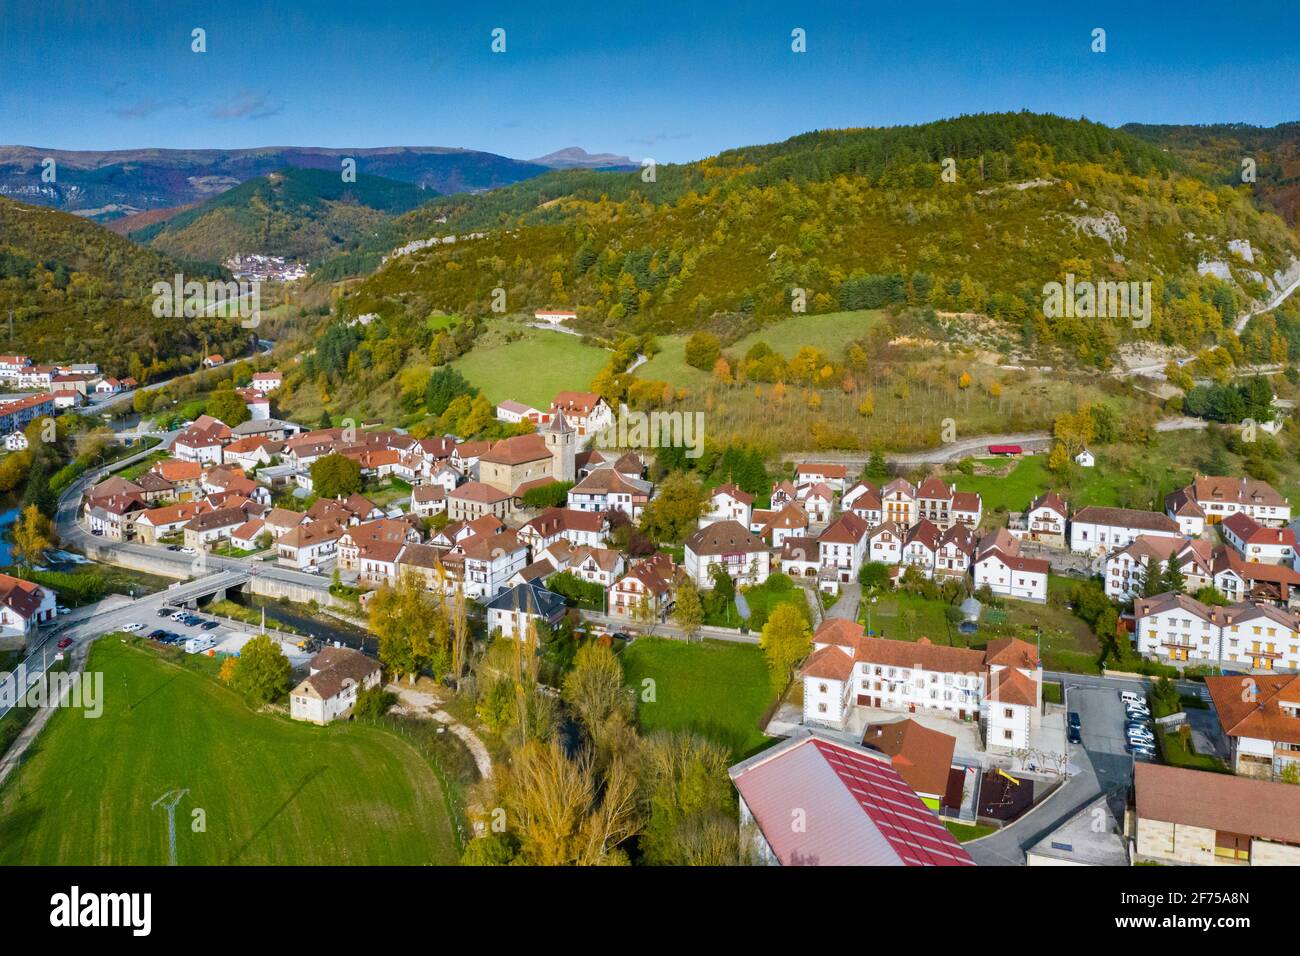 Aerial view of a village and hillsides. Stock Photo